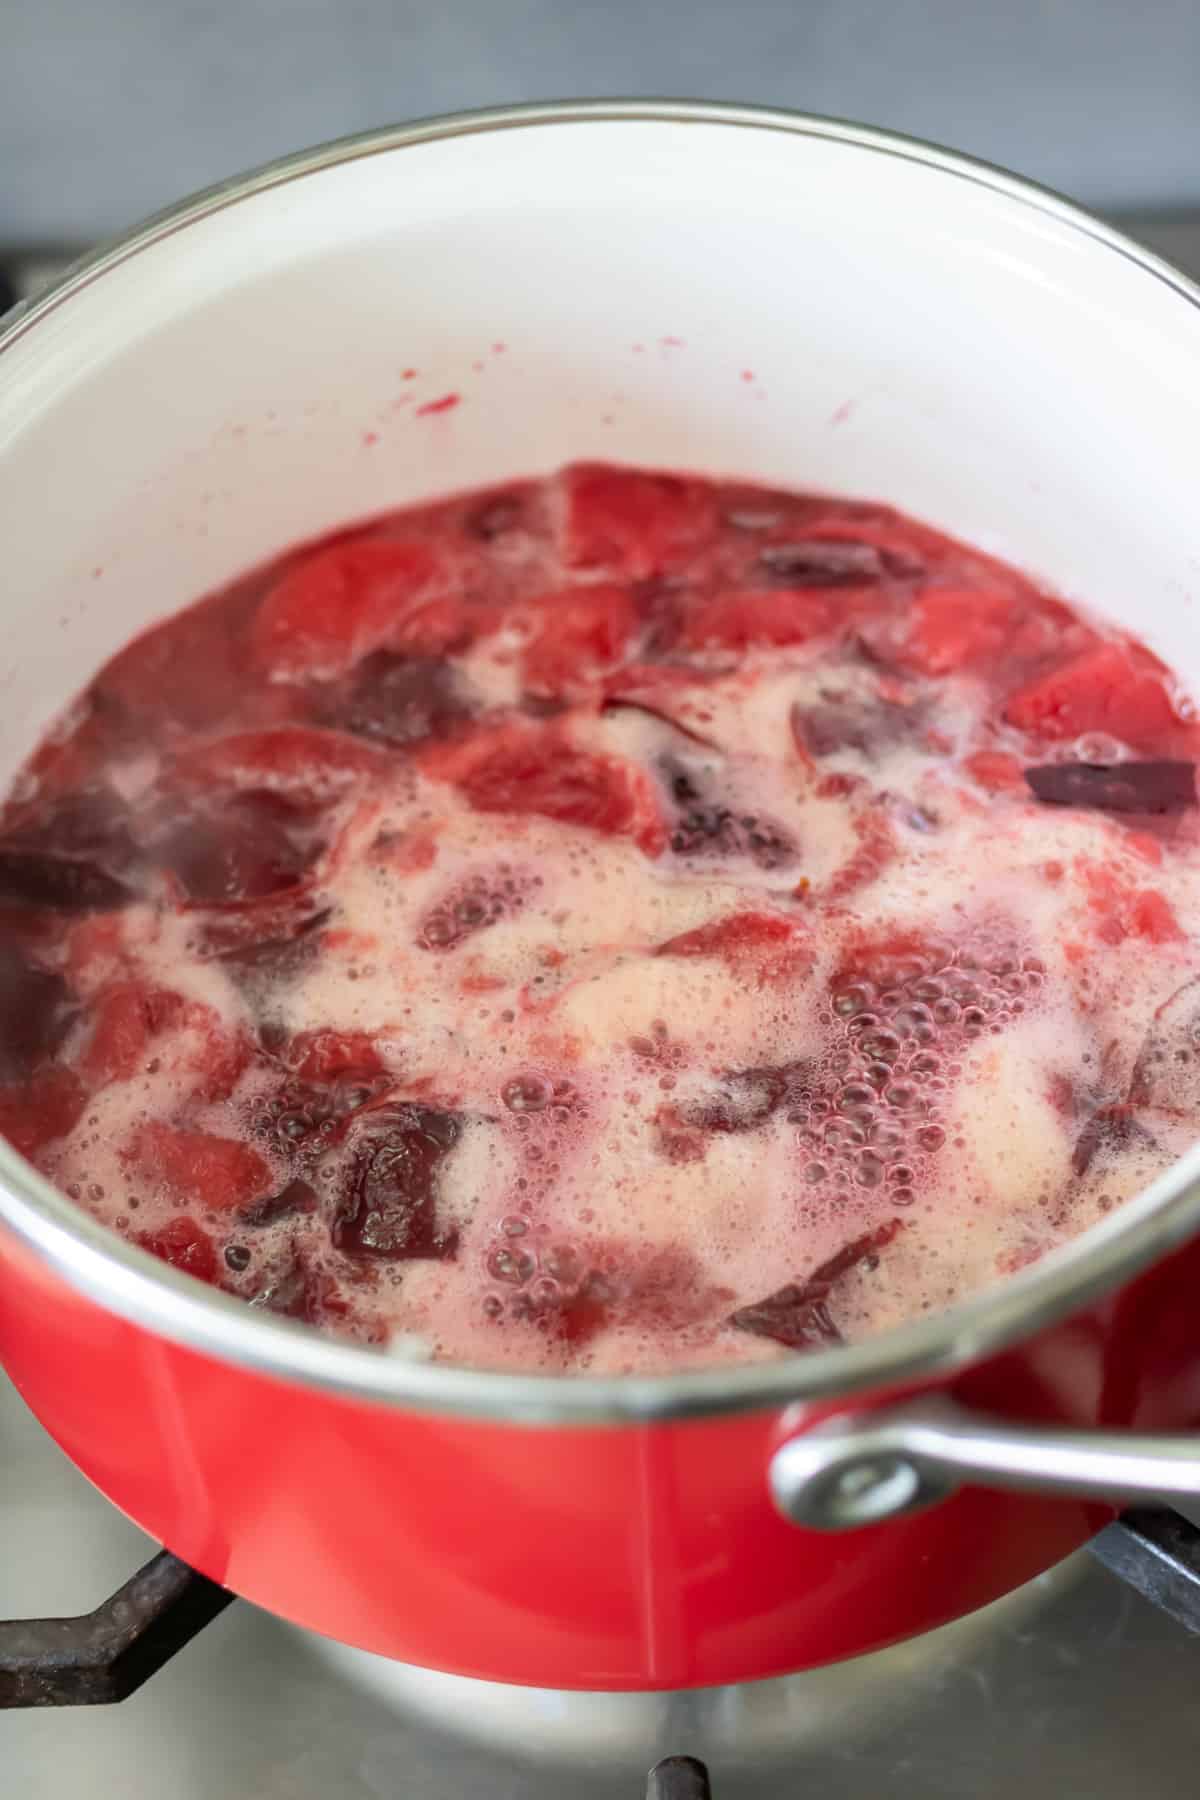 Boiling plums in sugar water.